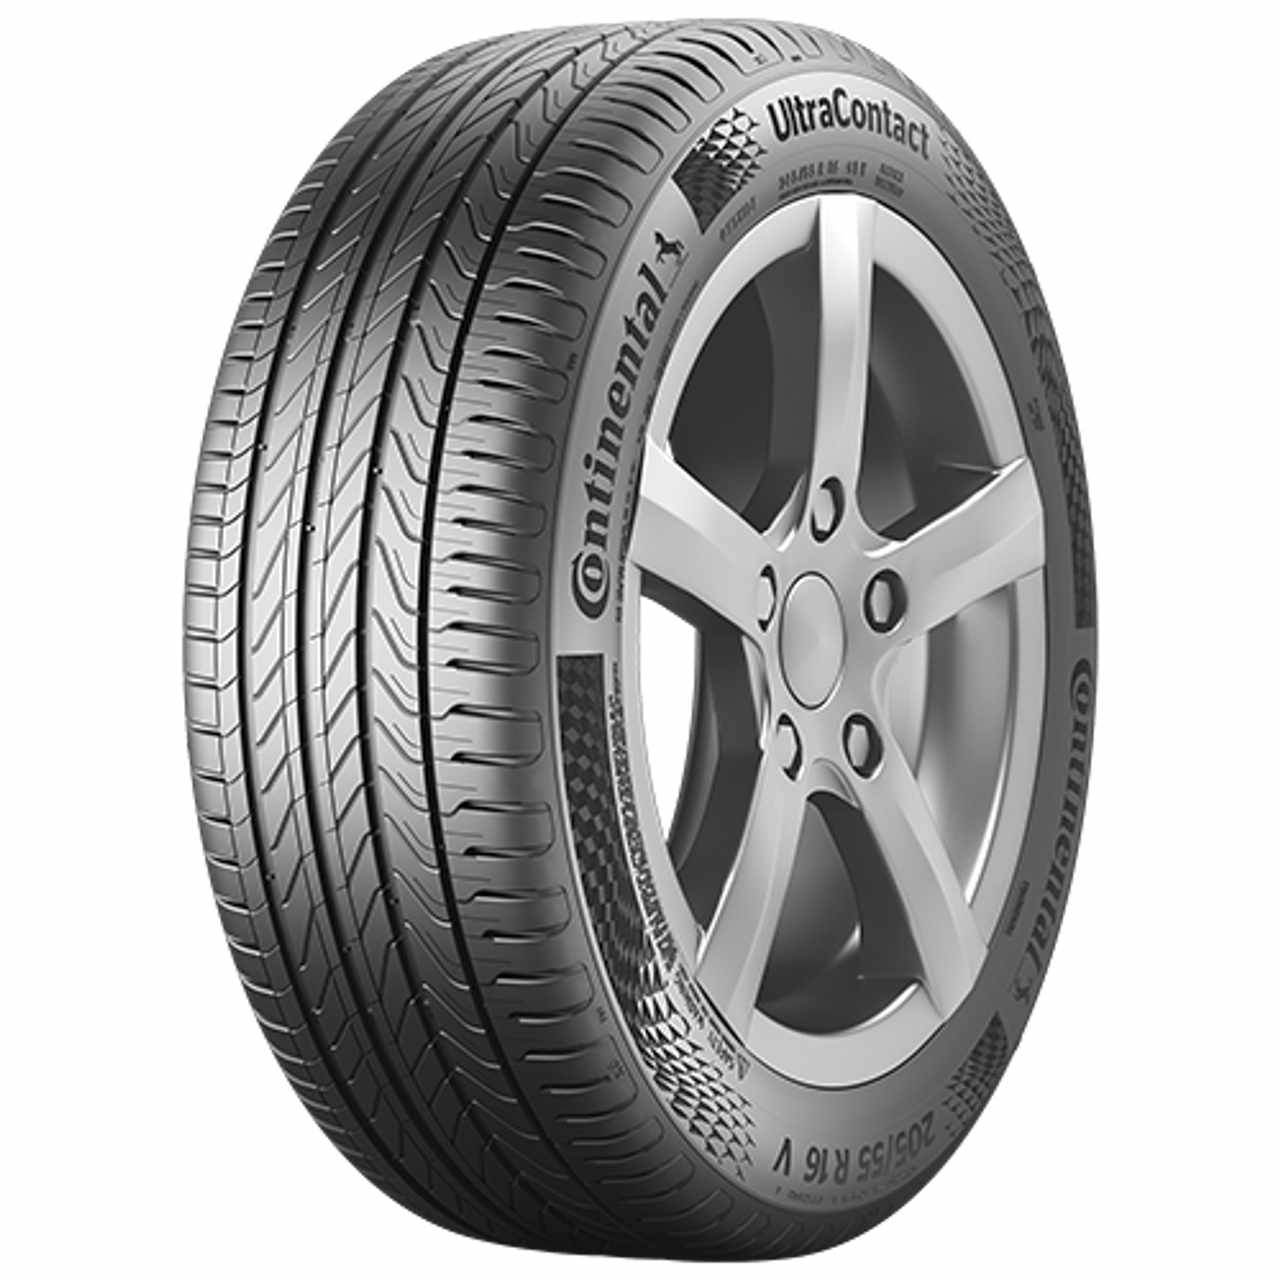 CONTINENTAL ULTRACONTACT (EVc) 185/60R14 82H BSW